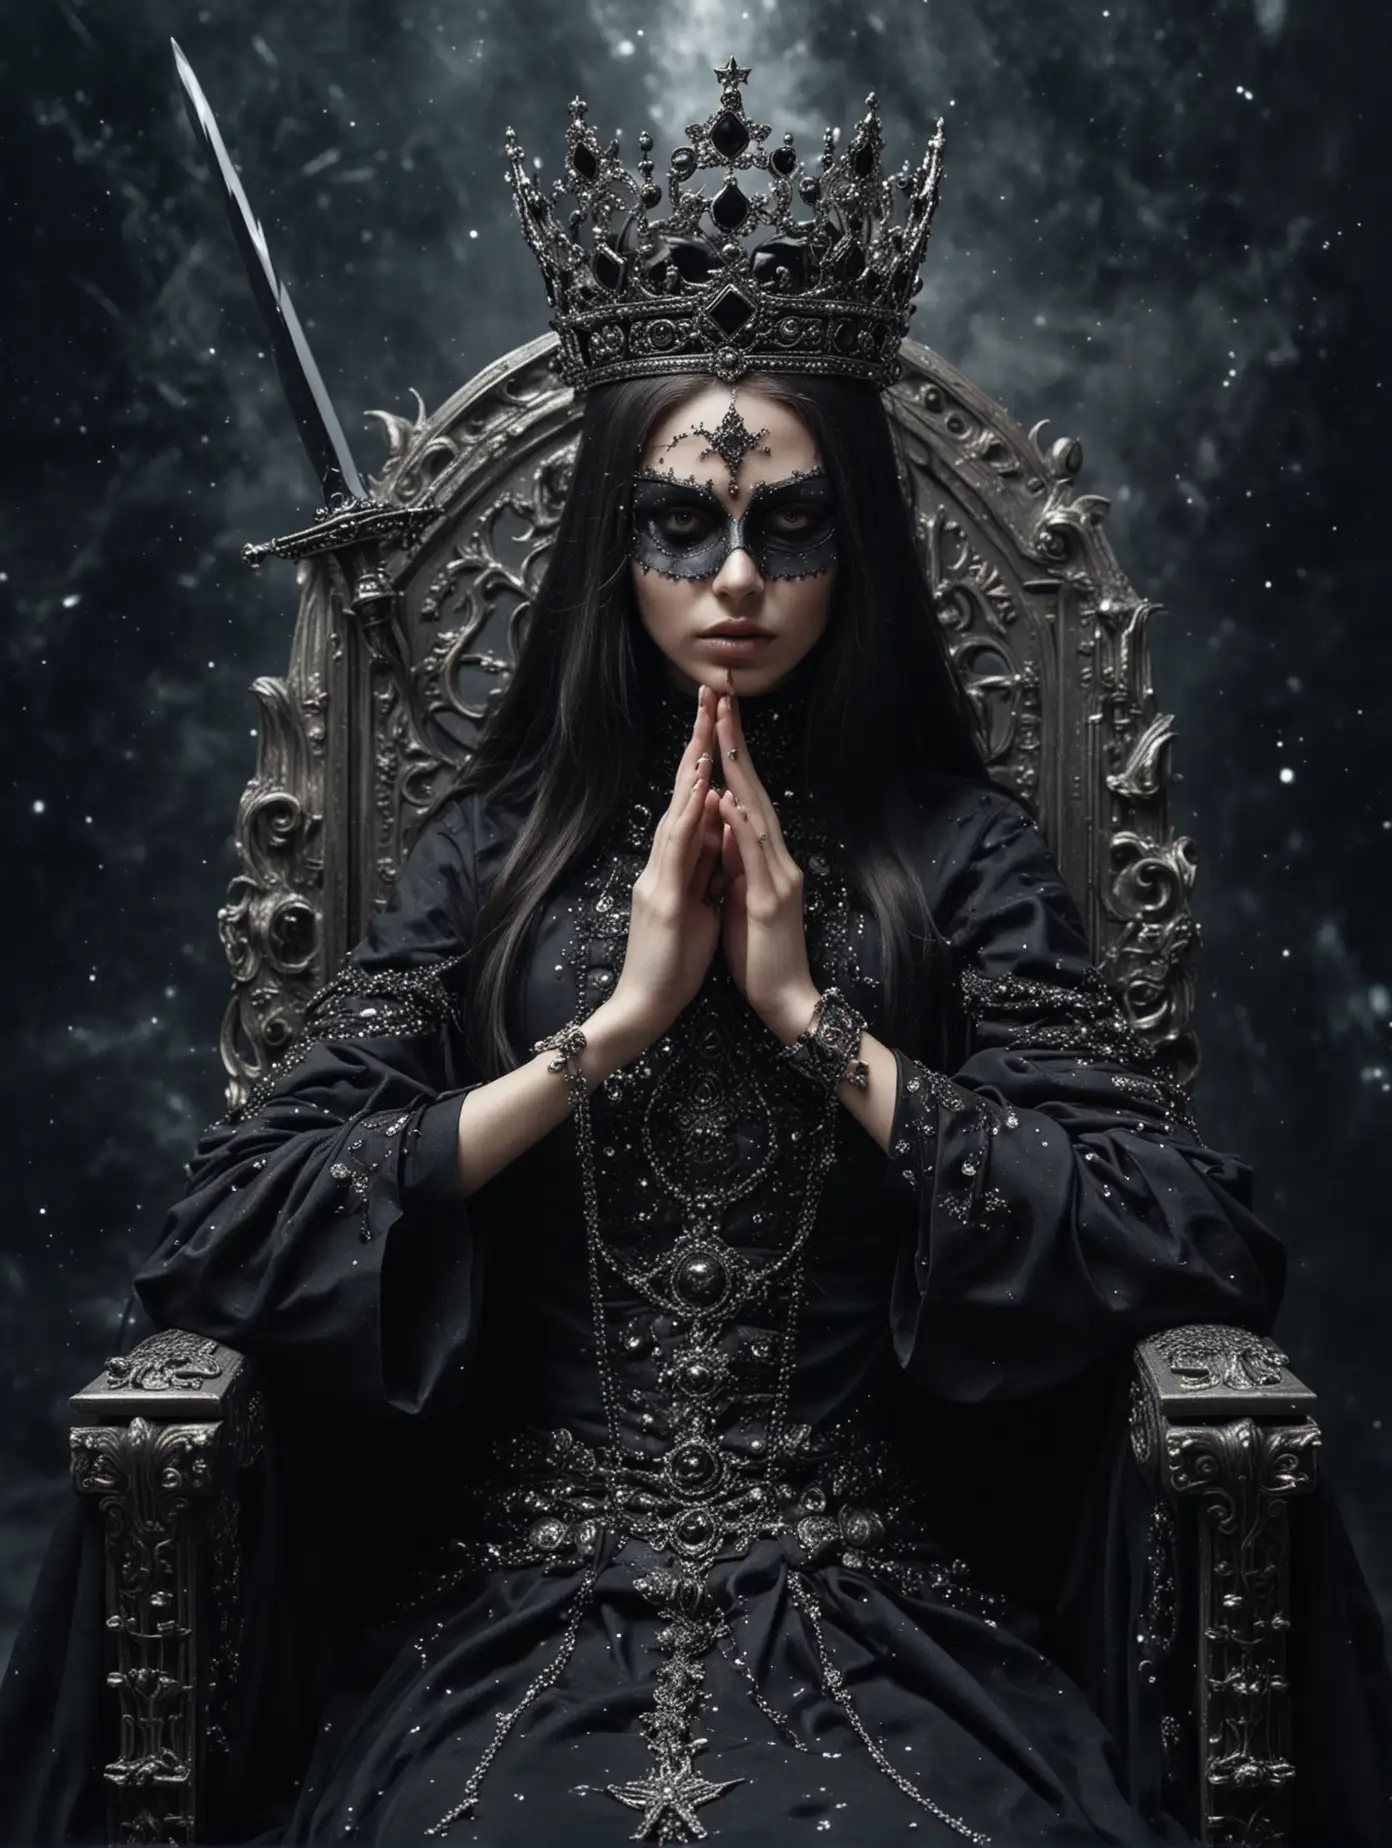 Mystical-Sister-Geserit-Queen-of-the-Cosmos-with-Sword-and-Crown